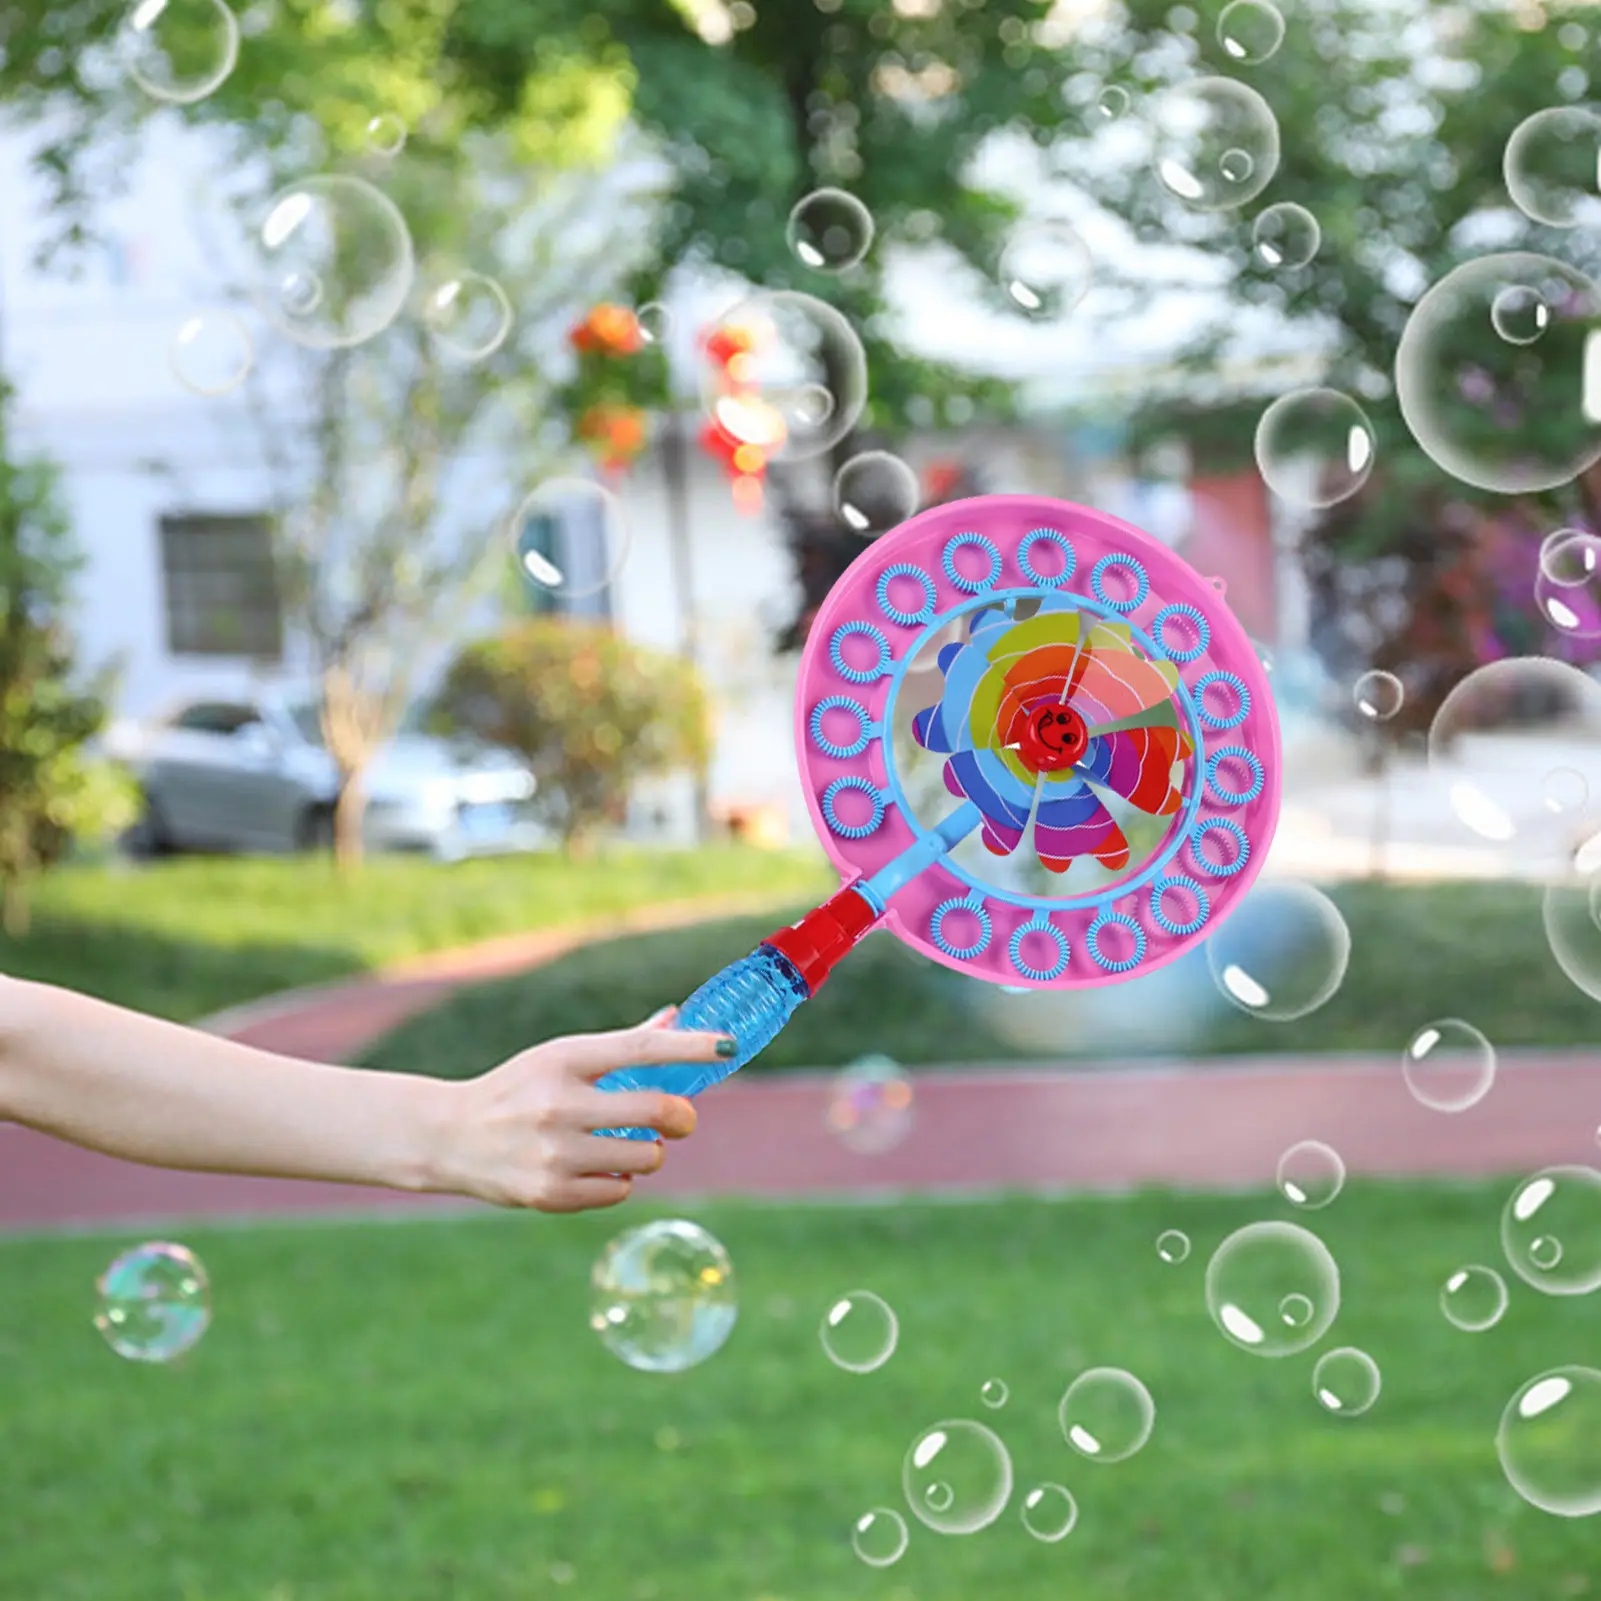 

1PC Porous Summer Windmill Bubble Blower Pinwheel Bubble Wand Spinner Bubble Maker Soap Bubble Machine Outdoor Toys For Kids